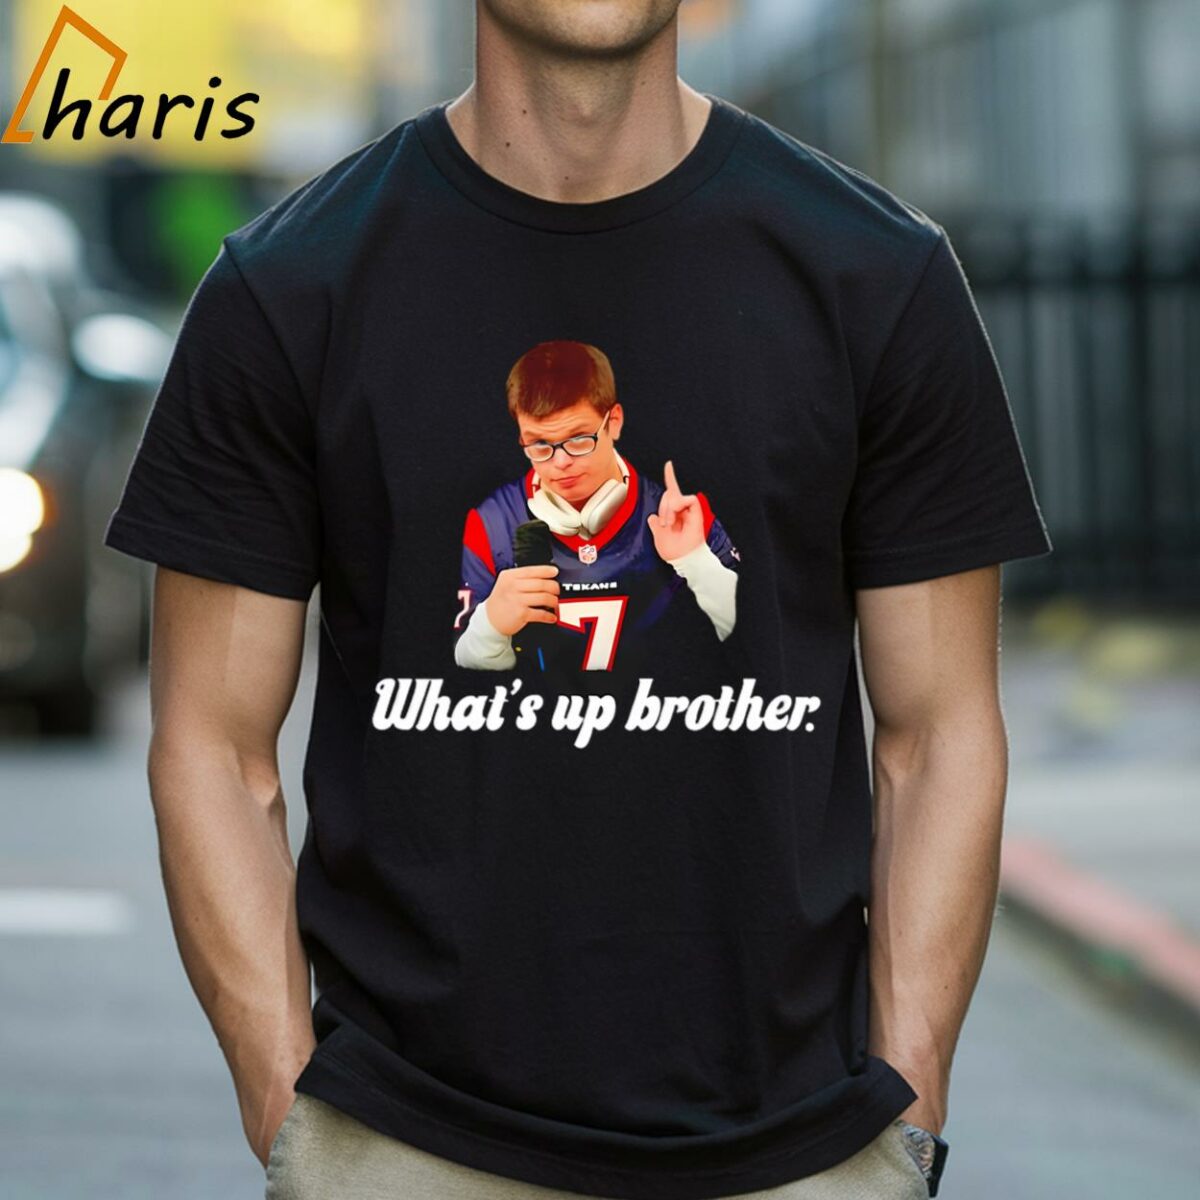 Whats Up Brother The Sketch Real Shirt 1 Shirt